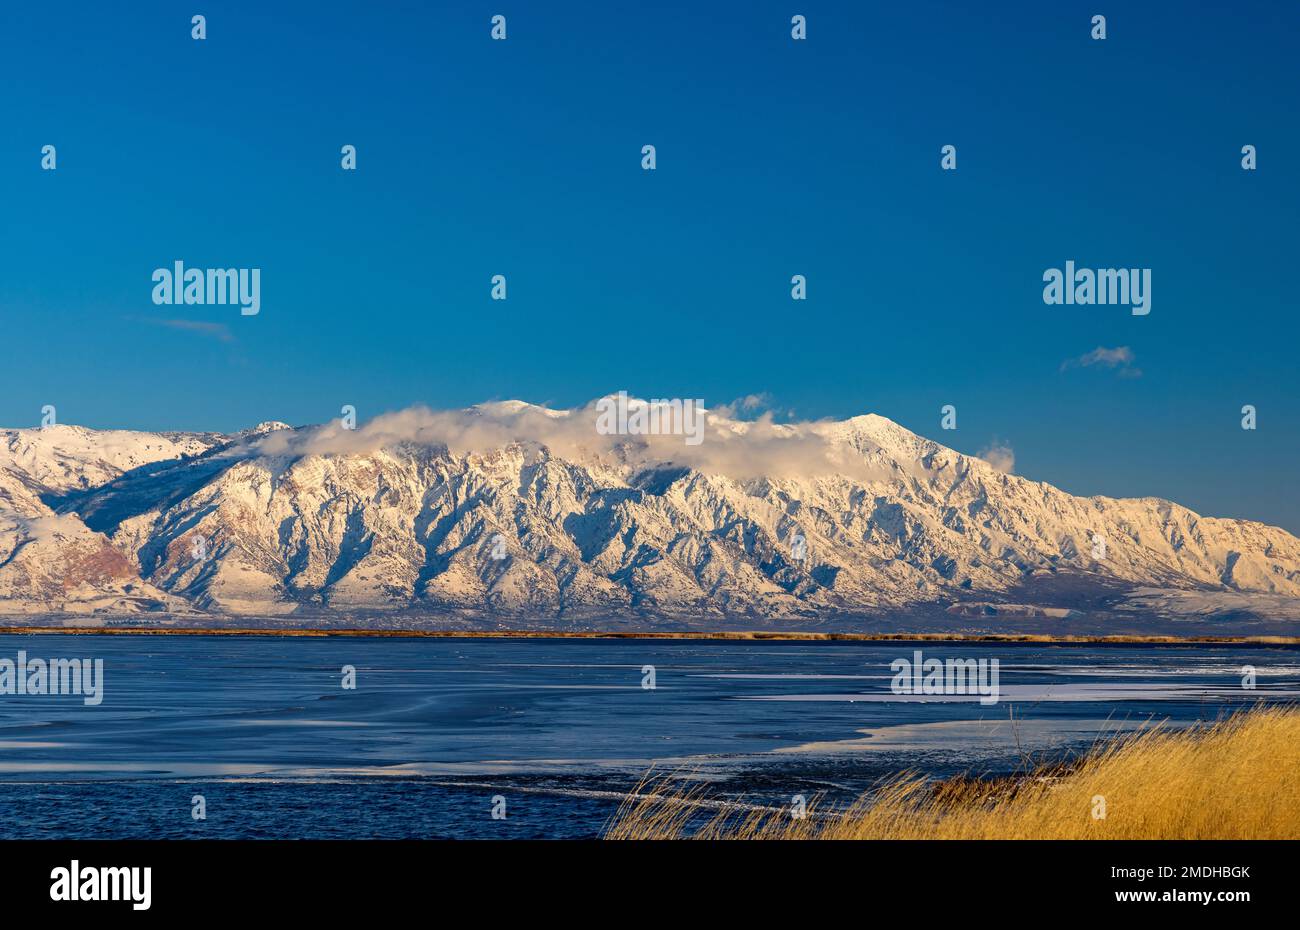 This is a view of majestic Willard Mountain on a bright, sunny January day. This view looks east from Bear River Migratory Bird Refuge, Utah, USA. Stock Photo